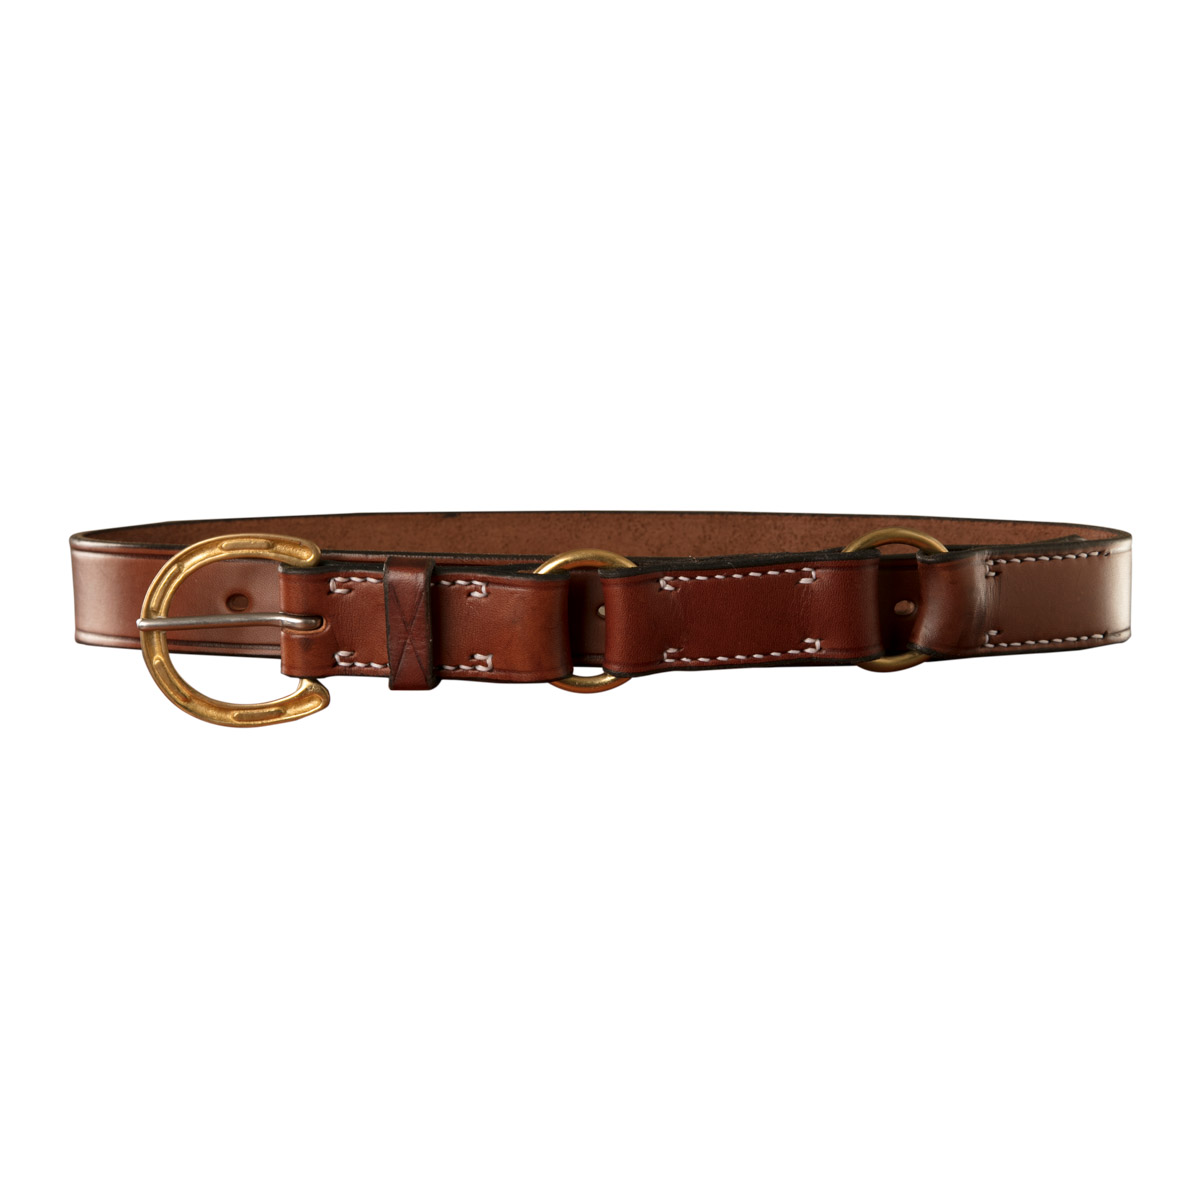 Stockmans Hobble Style Belt, Solid Leather, Brass Horseshoe Buckle and 2 Rings 1